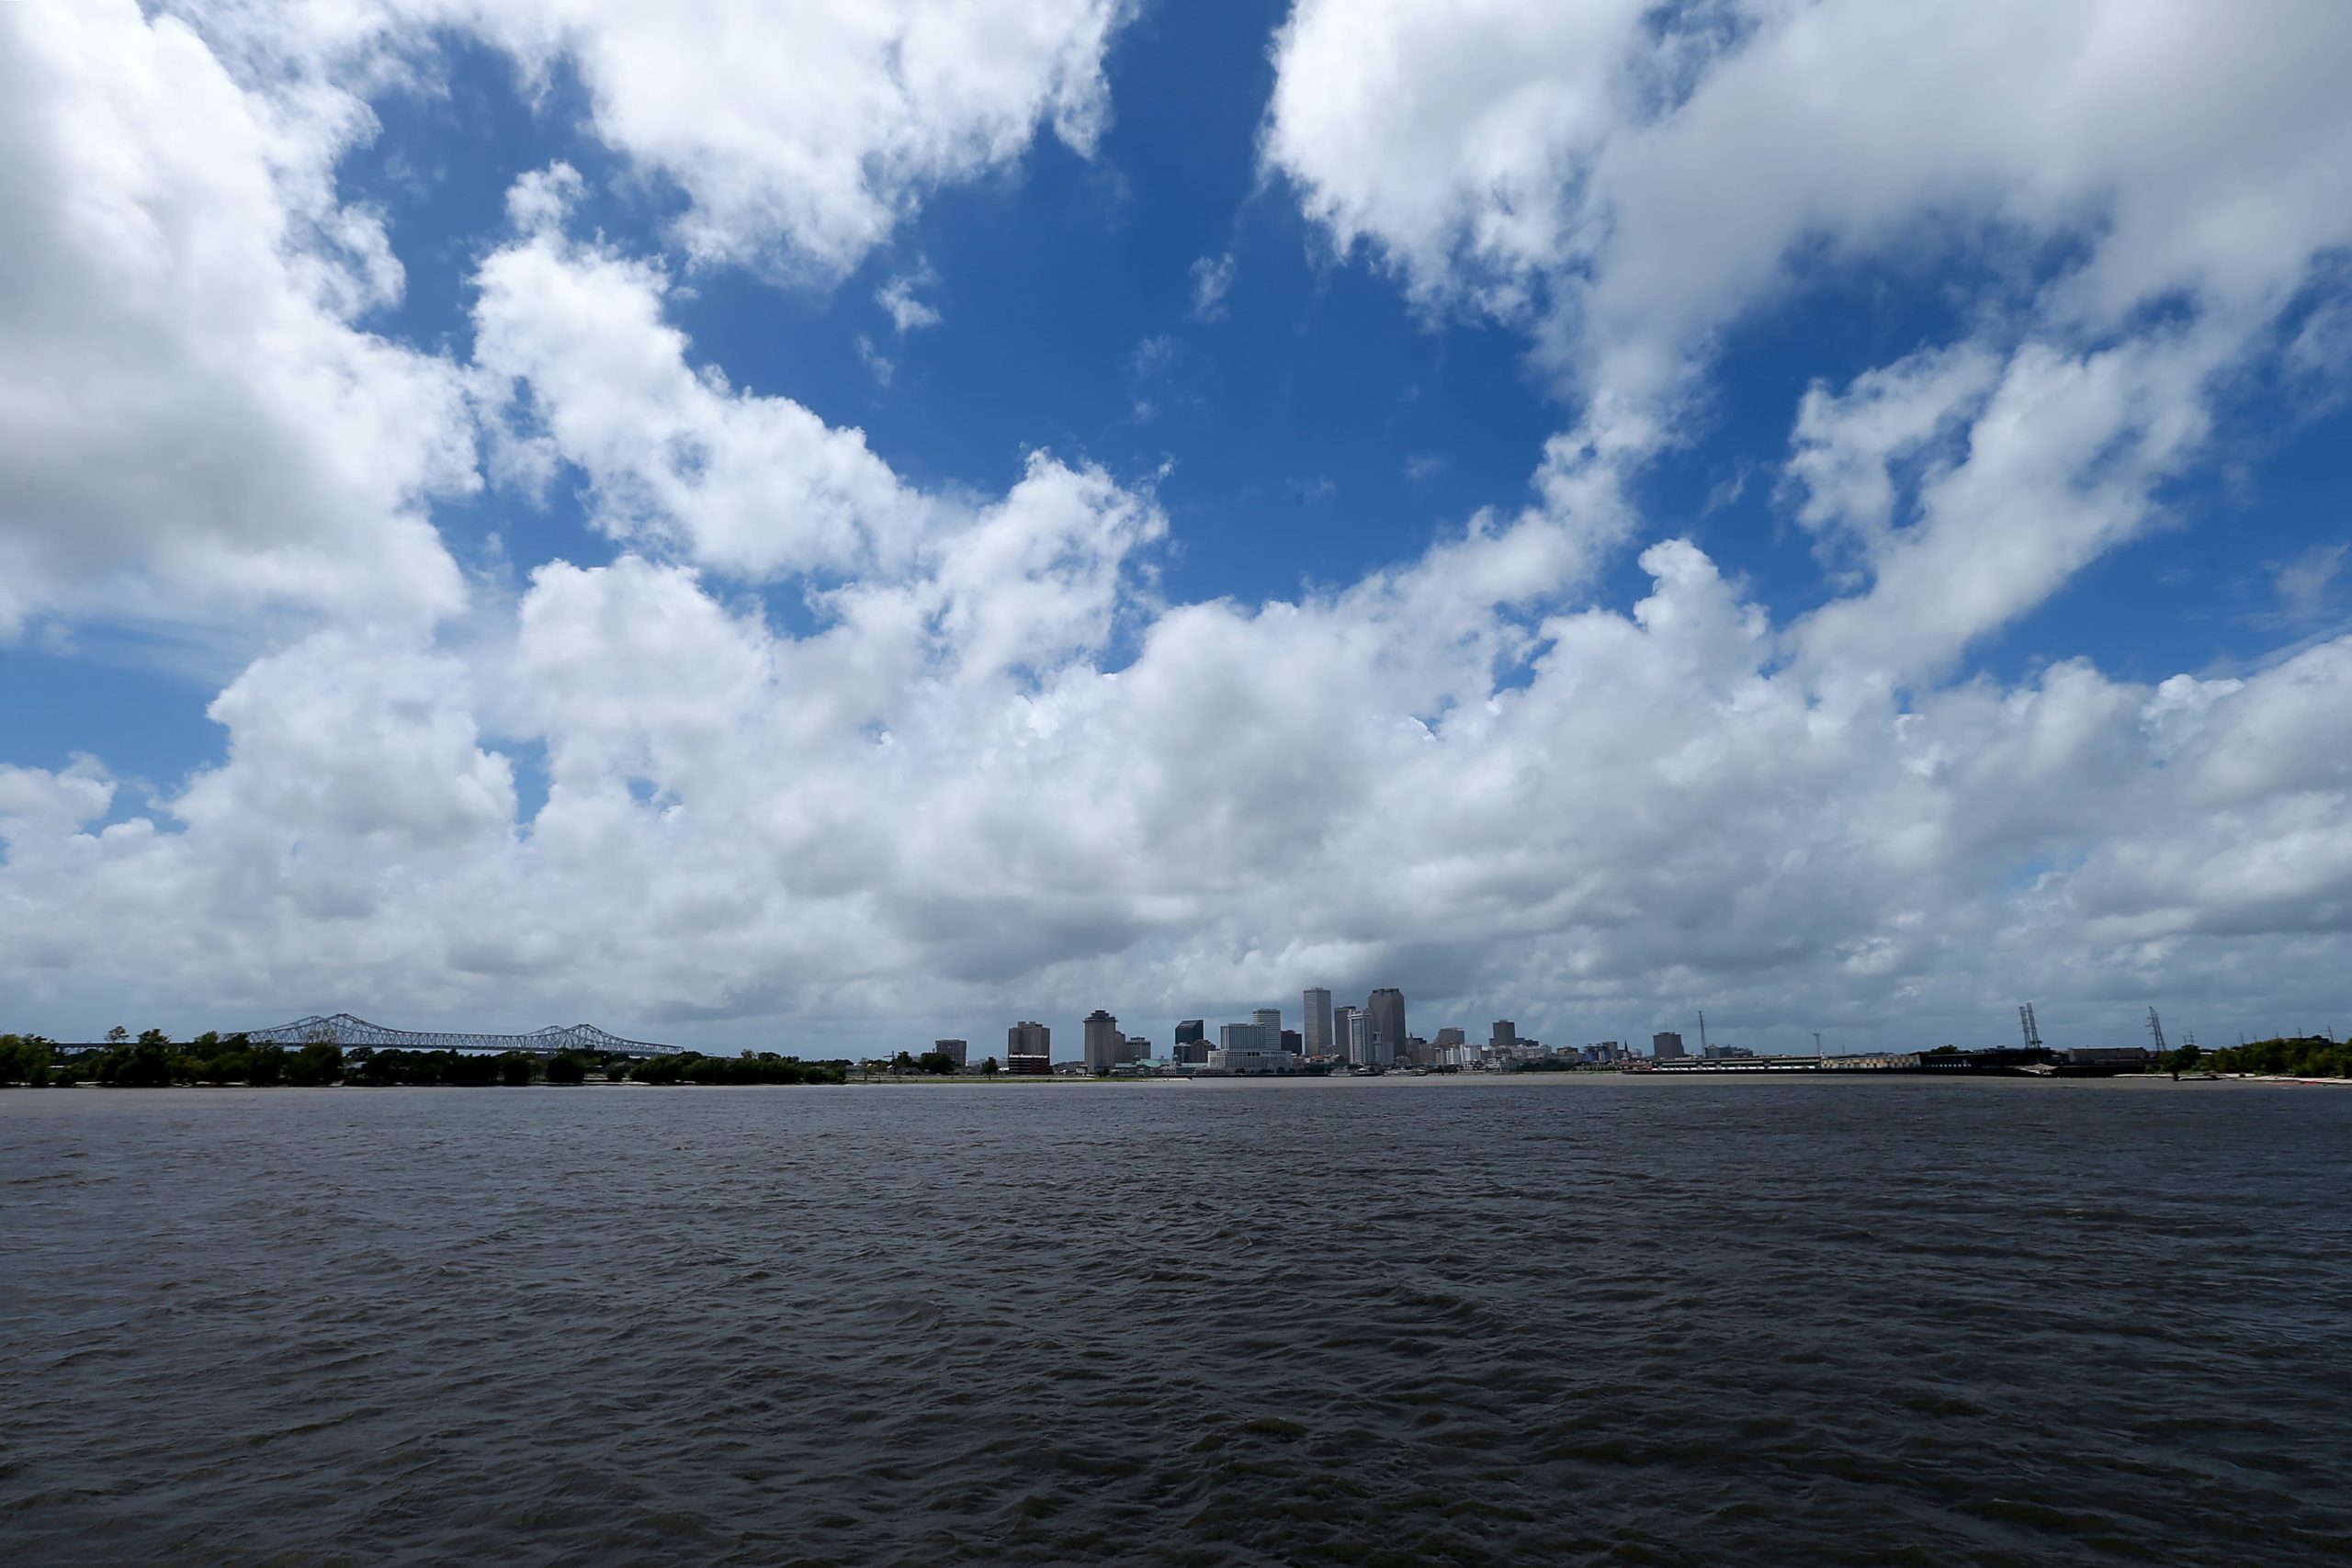 NEW ORLEANS, LOUISIANA  - AUGUST 25:   Storm clouds are seen over the Mississippi River and downtown New Orleans as Hurricane Laura churns in the Gulf of Mexico on August 25, 2020 in New Orleans, Louisiana. Hurricane Laura is expected to hit somewhere along the Gulf Coast late Wednesday and early Thursday. (Photo by Sean Gardner/Getty Images)